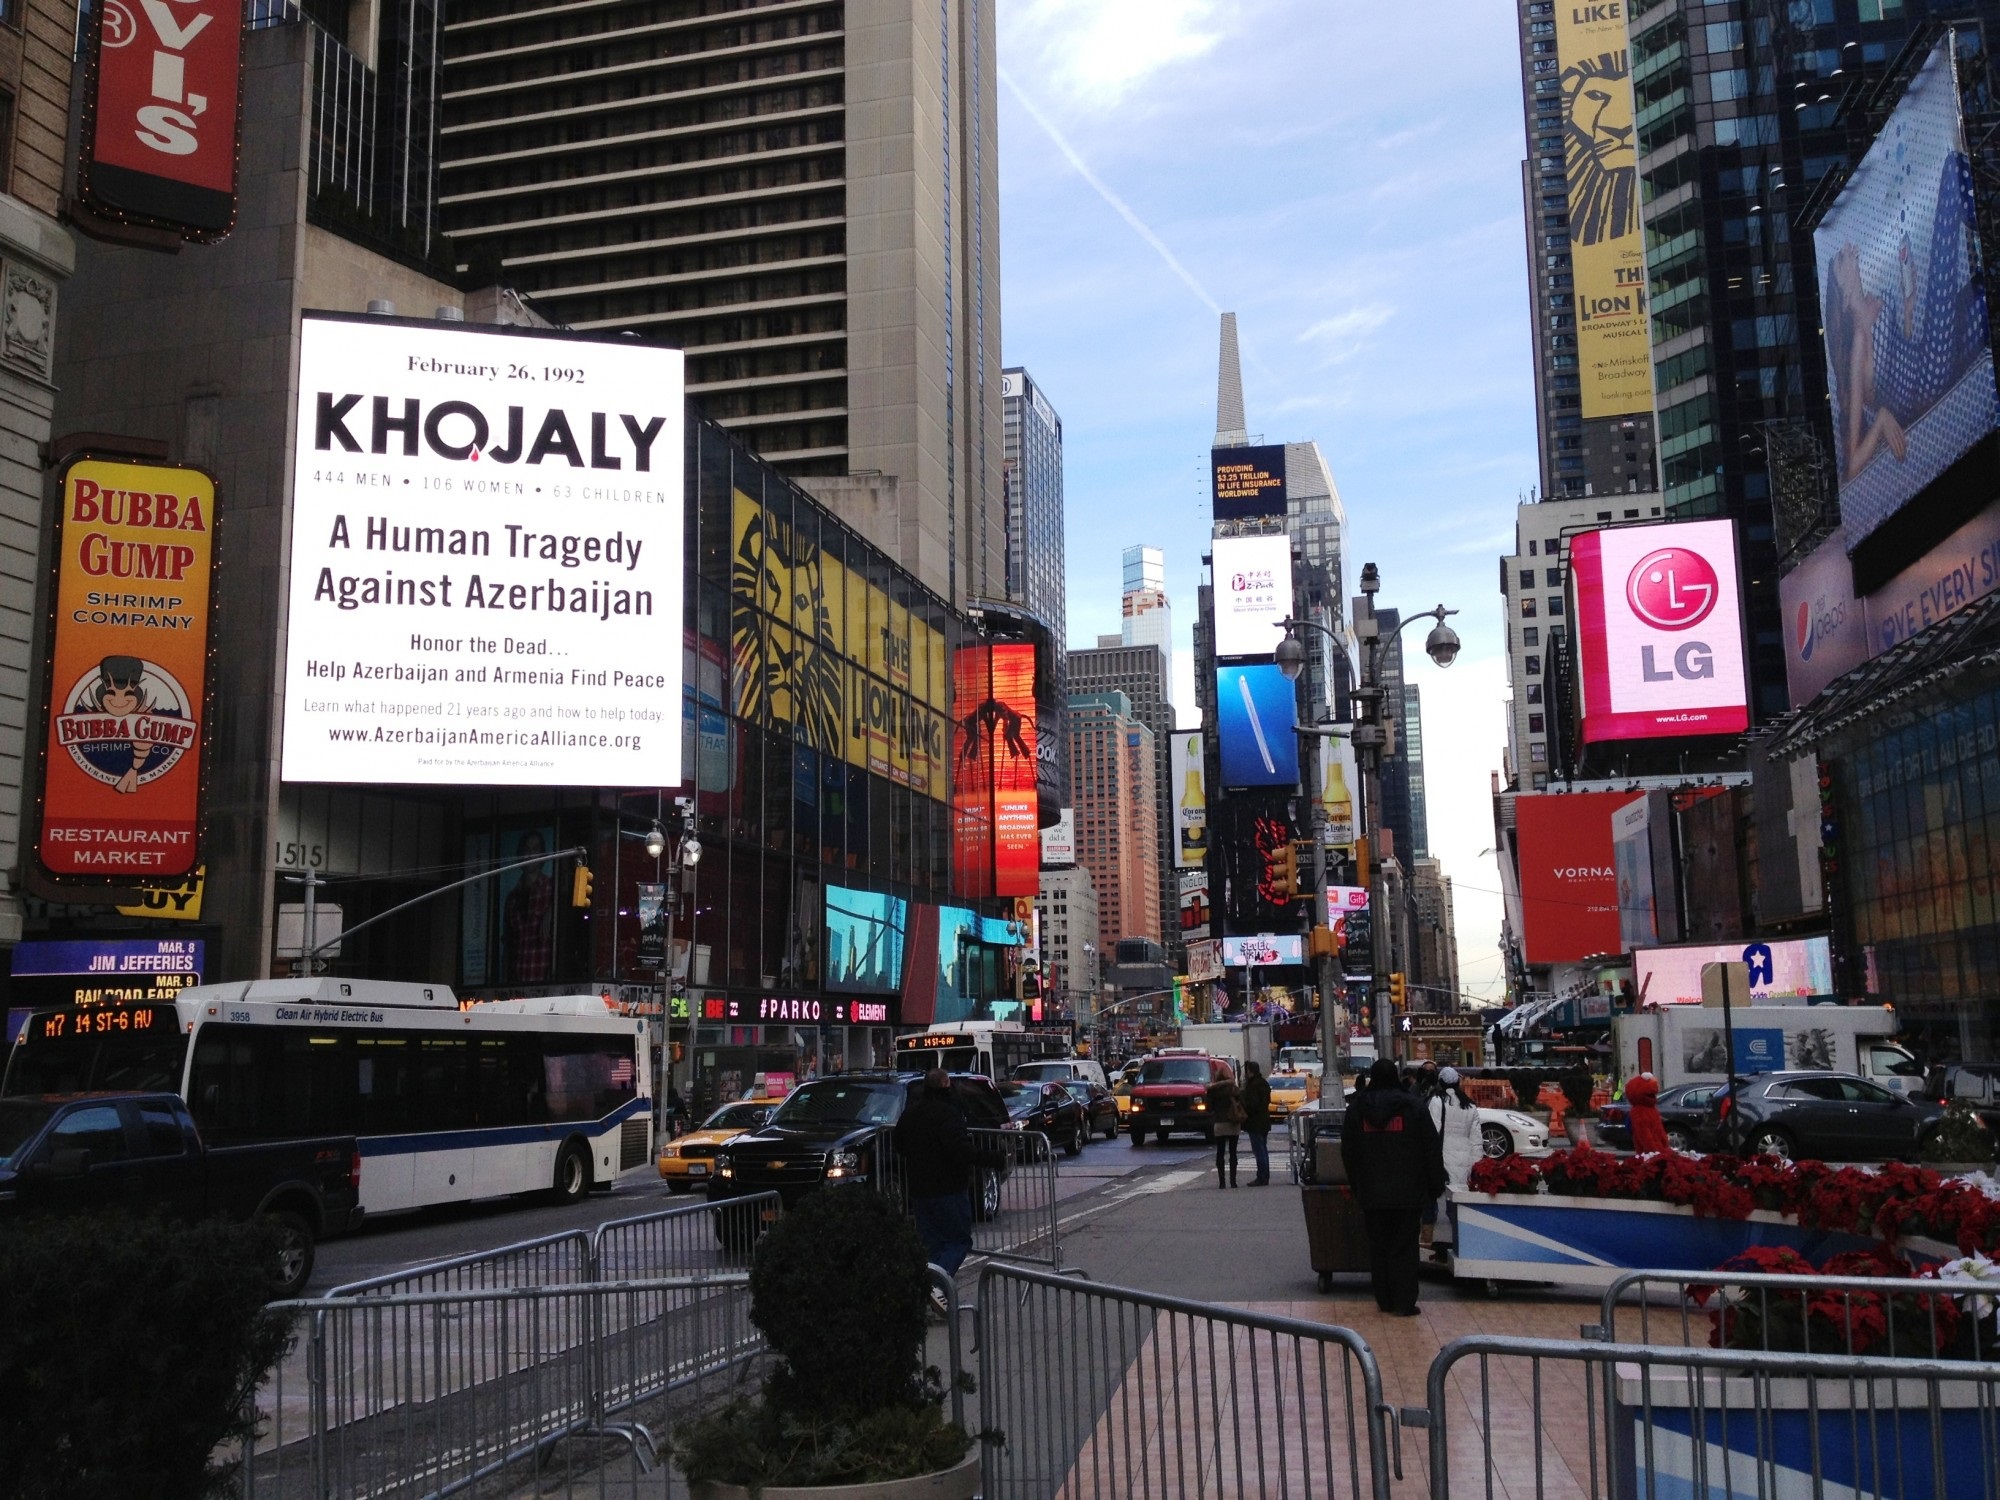 Azerbaijan-America Alliance launches campaign on Khojaly genocide